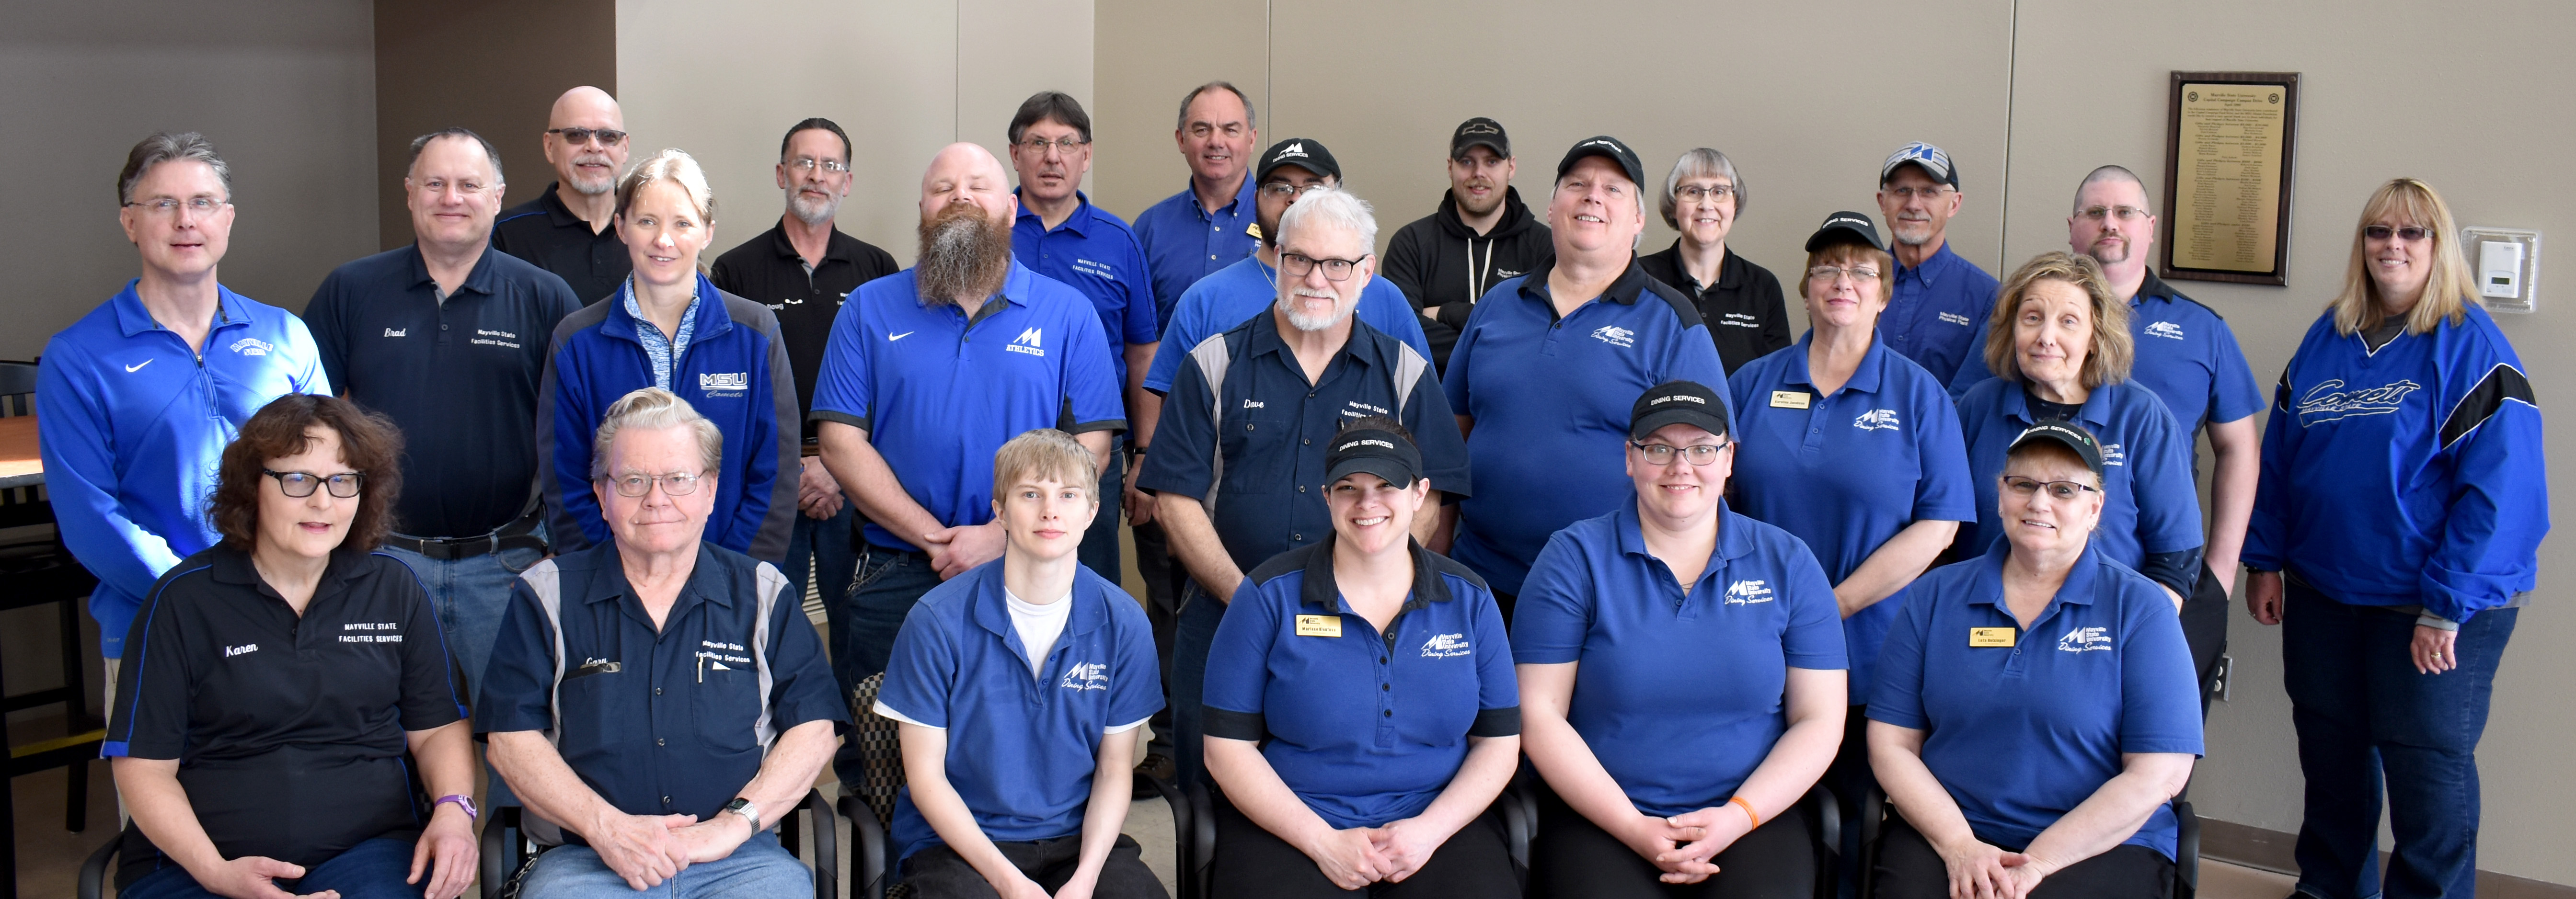 facilities physical plant and dining services staff.jpg